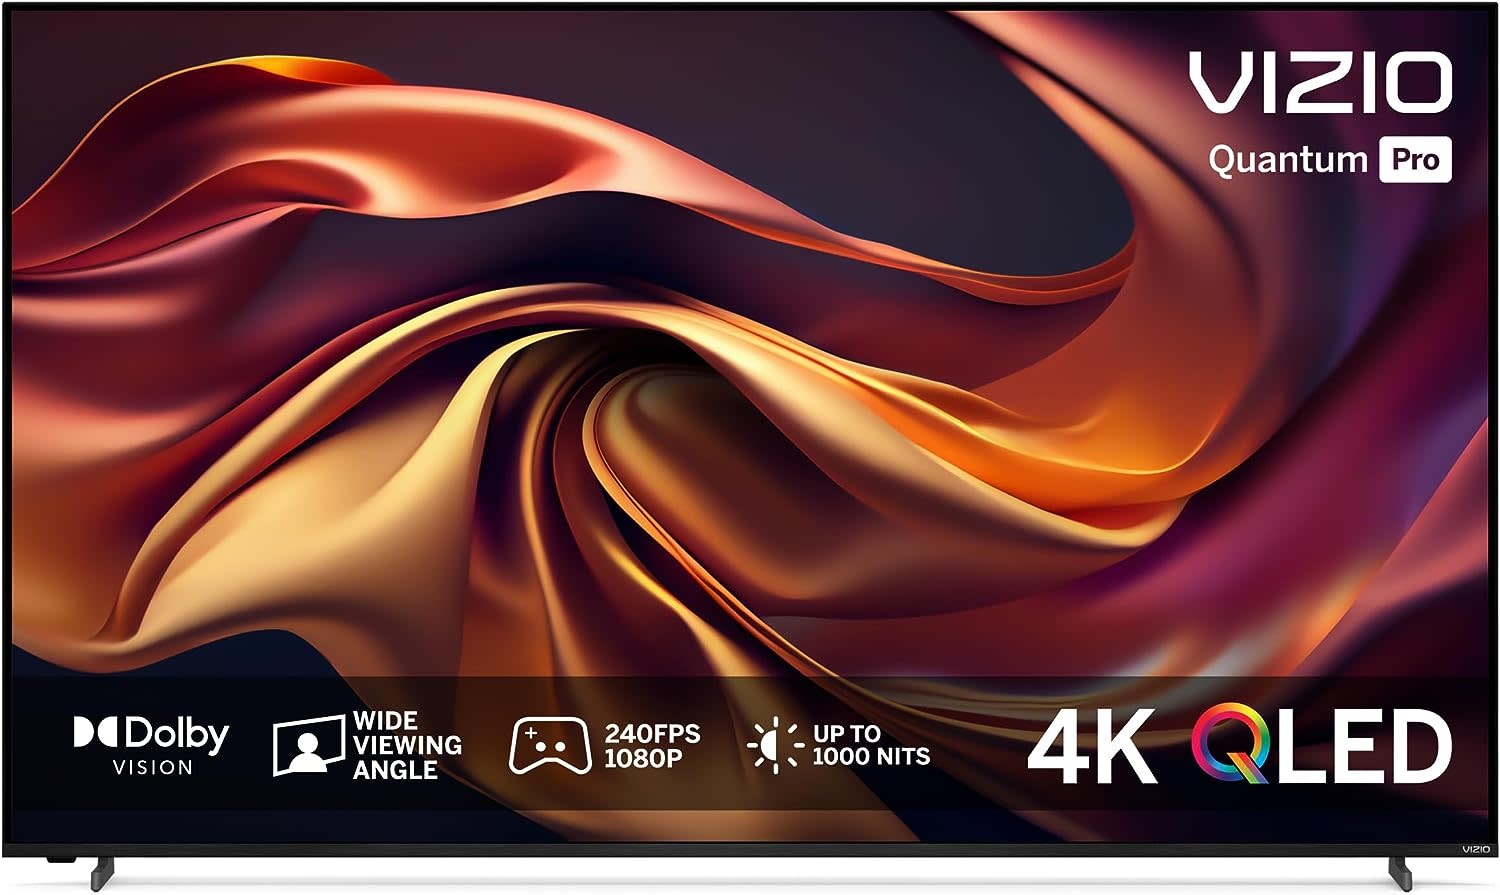 VIZIO 65-inch Quantum Pro 4K QLED 120Hz Smart TV with 1,000 nits  brightness, Dolby Vision, Local Dimming, 240FPS @ 1080p PC Gaming, WiFi 6E,  Apple